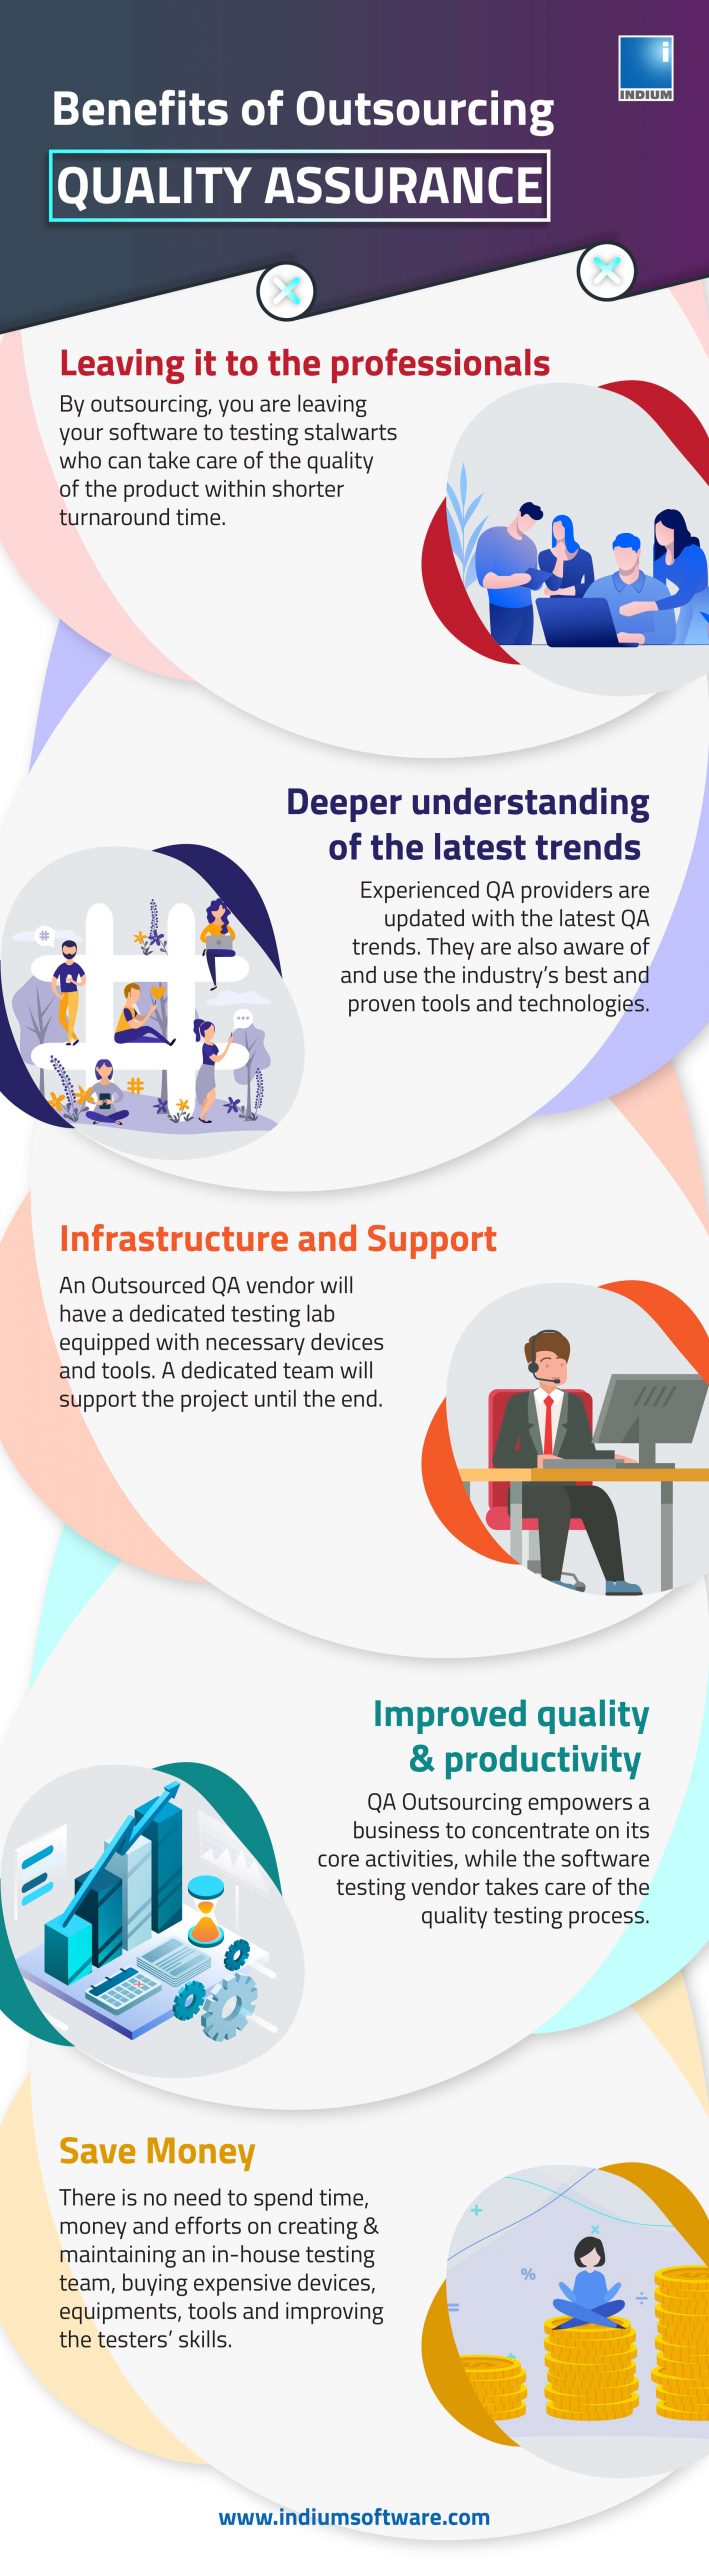 Benefits of Outsourcing QA Infographic